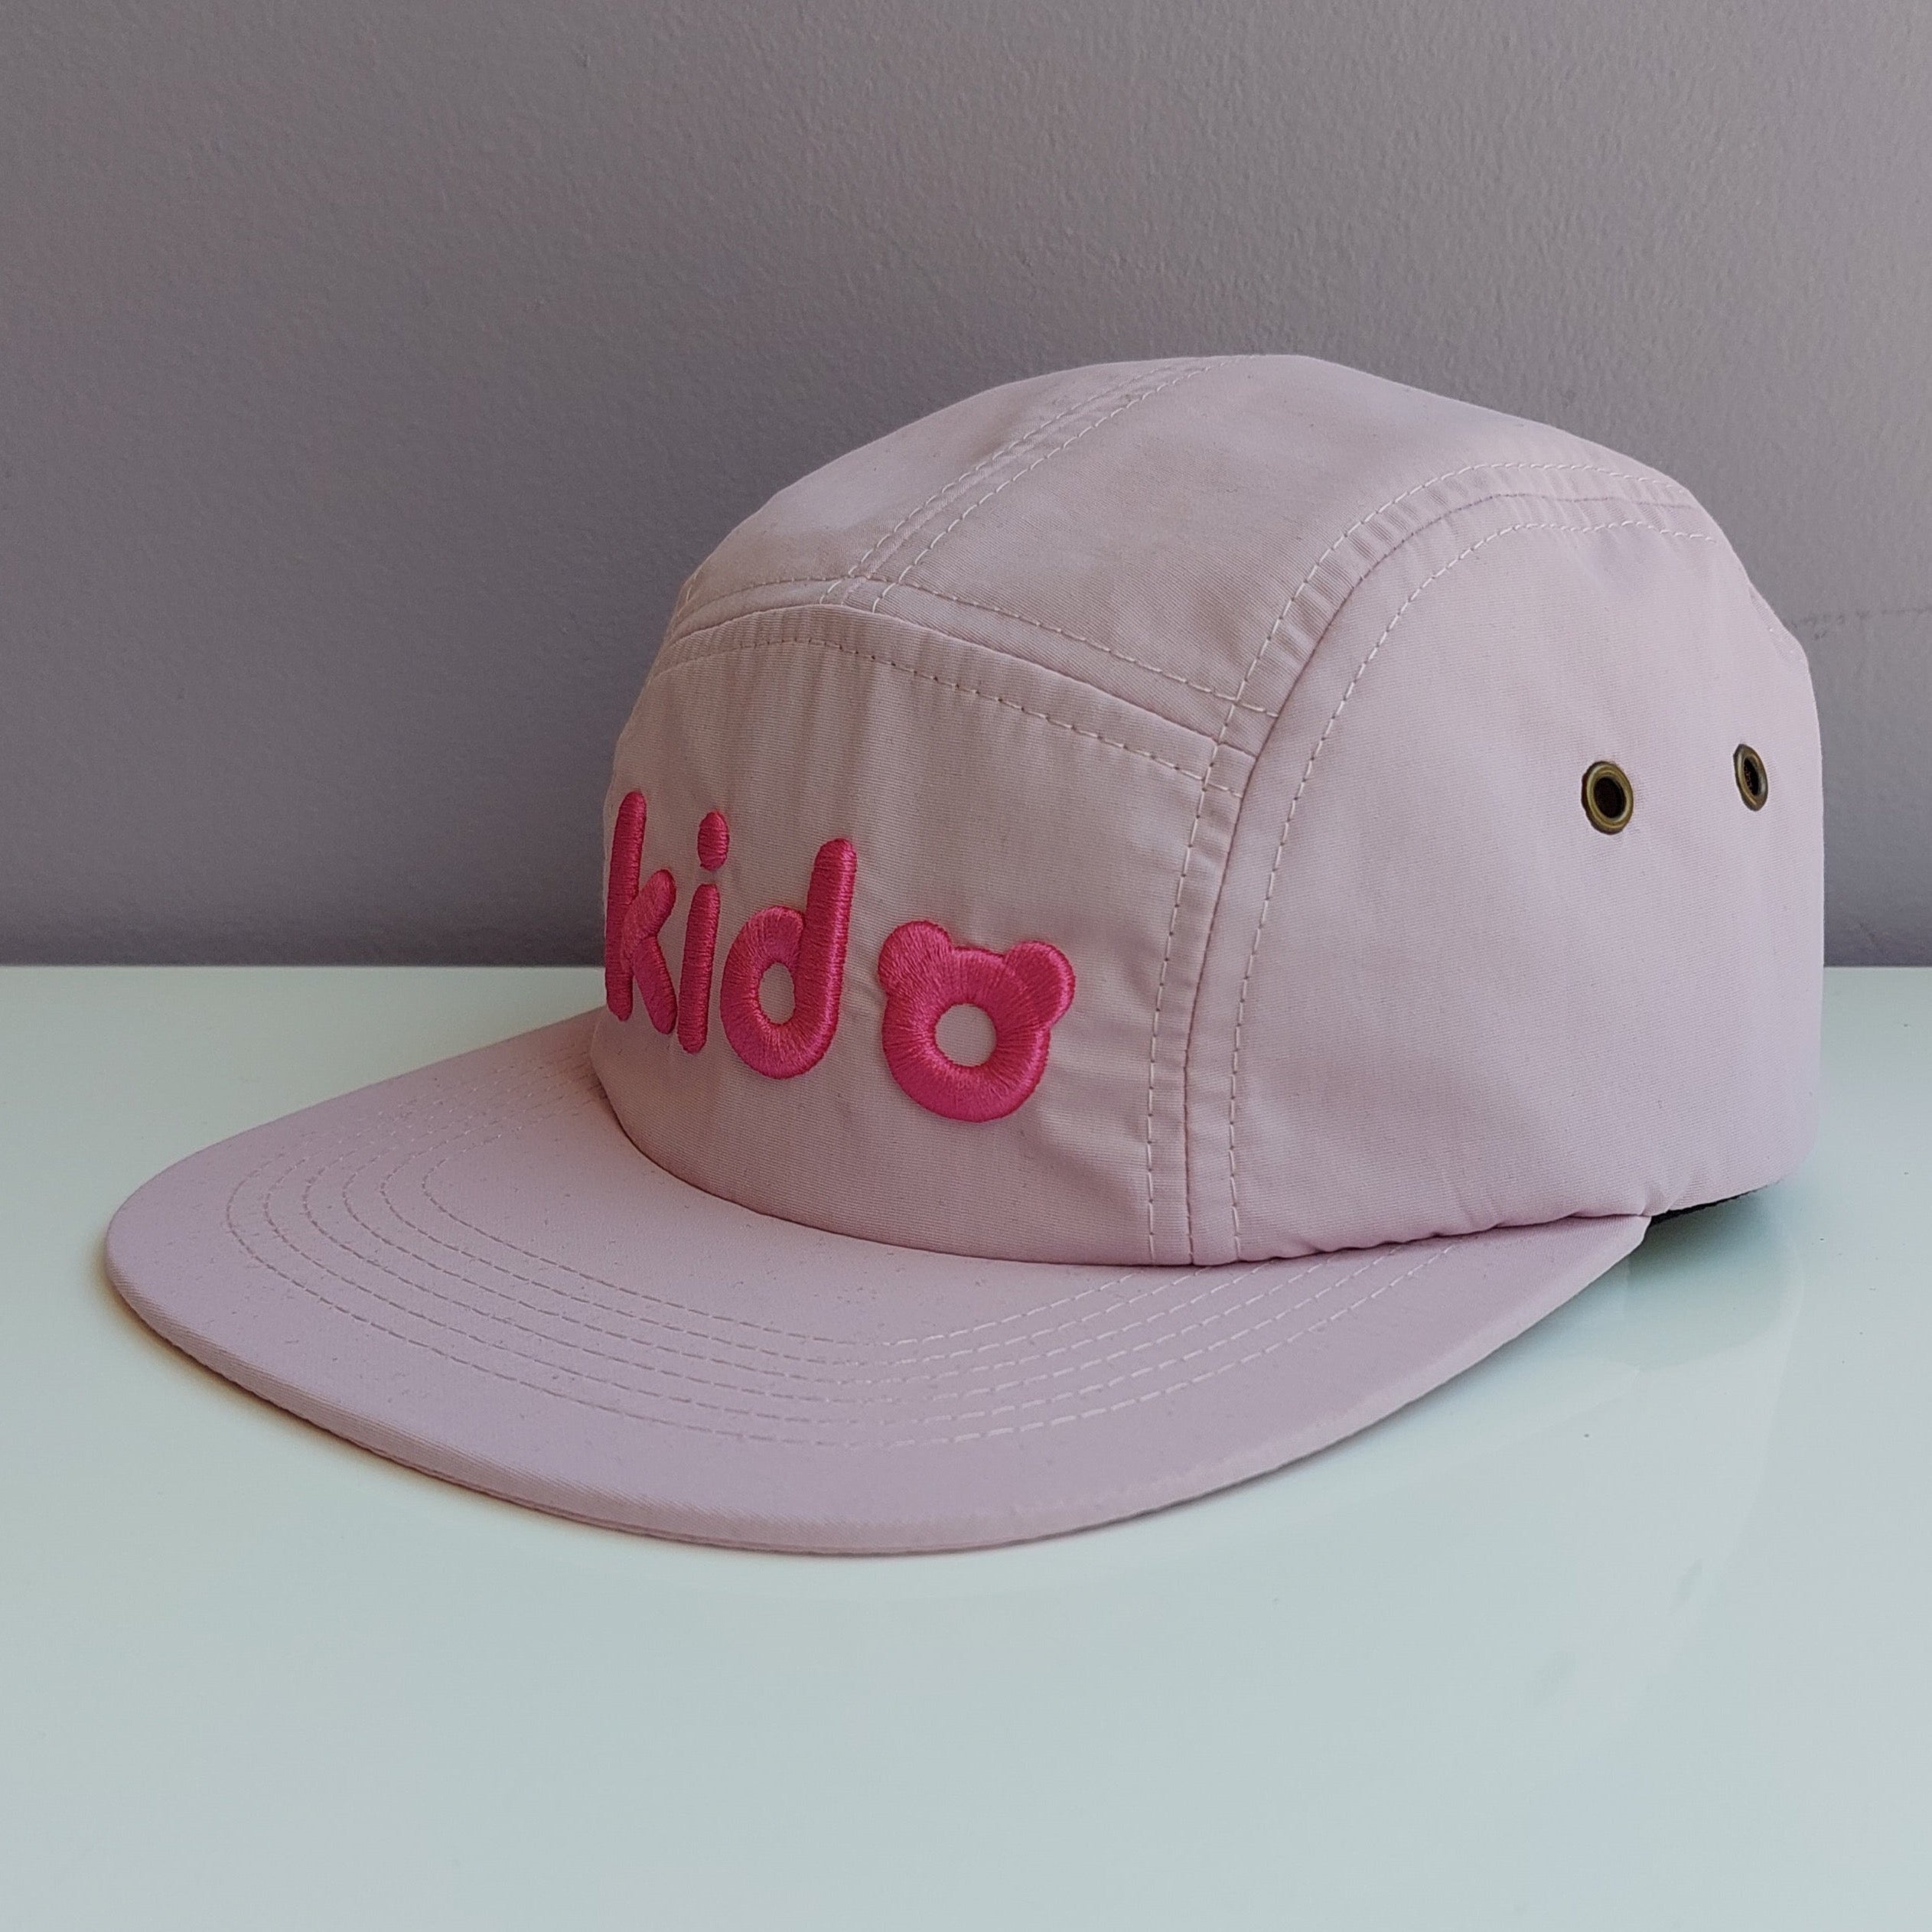 A pale pink 5 panel cap turned at a 45 degree angle sits on a white surface with a light purple background. The Kido logo is embroidered across the front in darker pink thread.